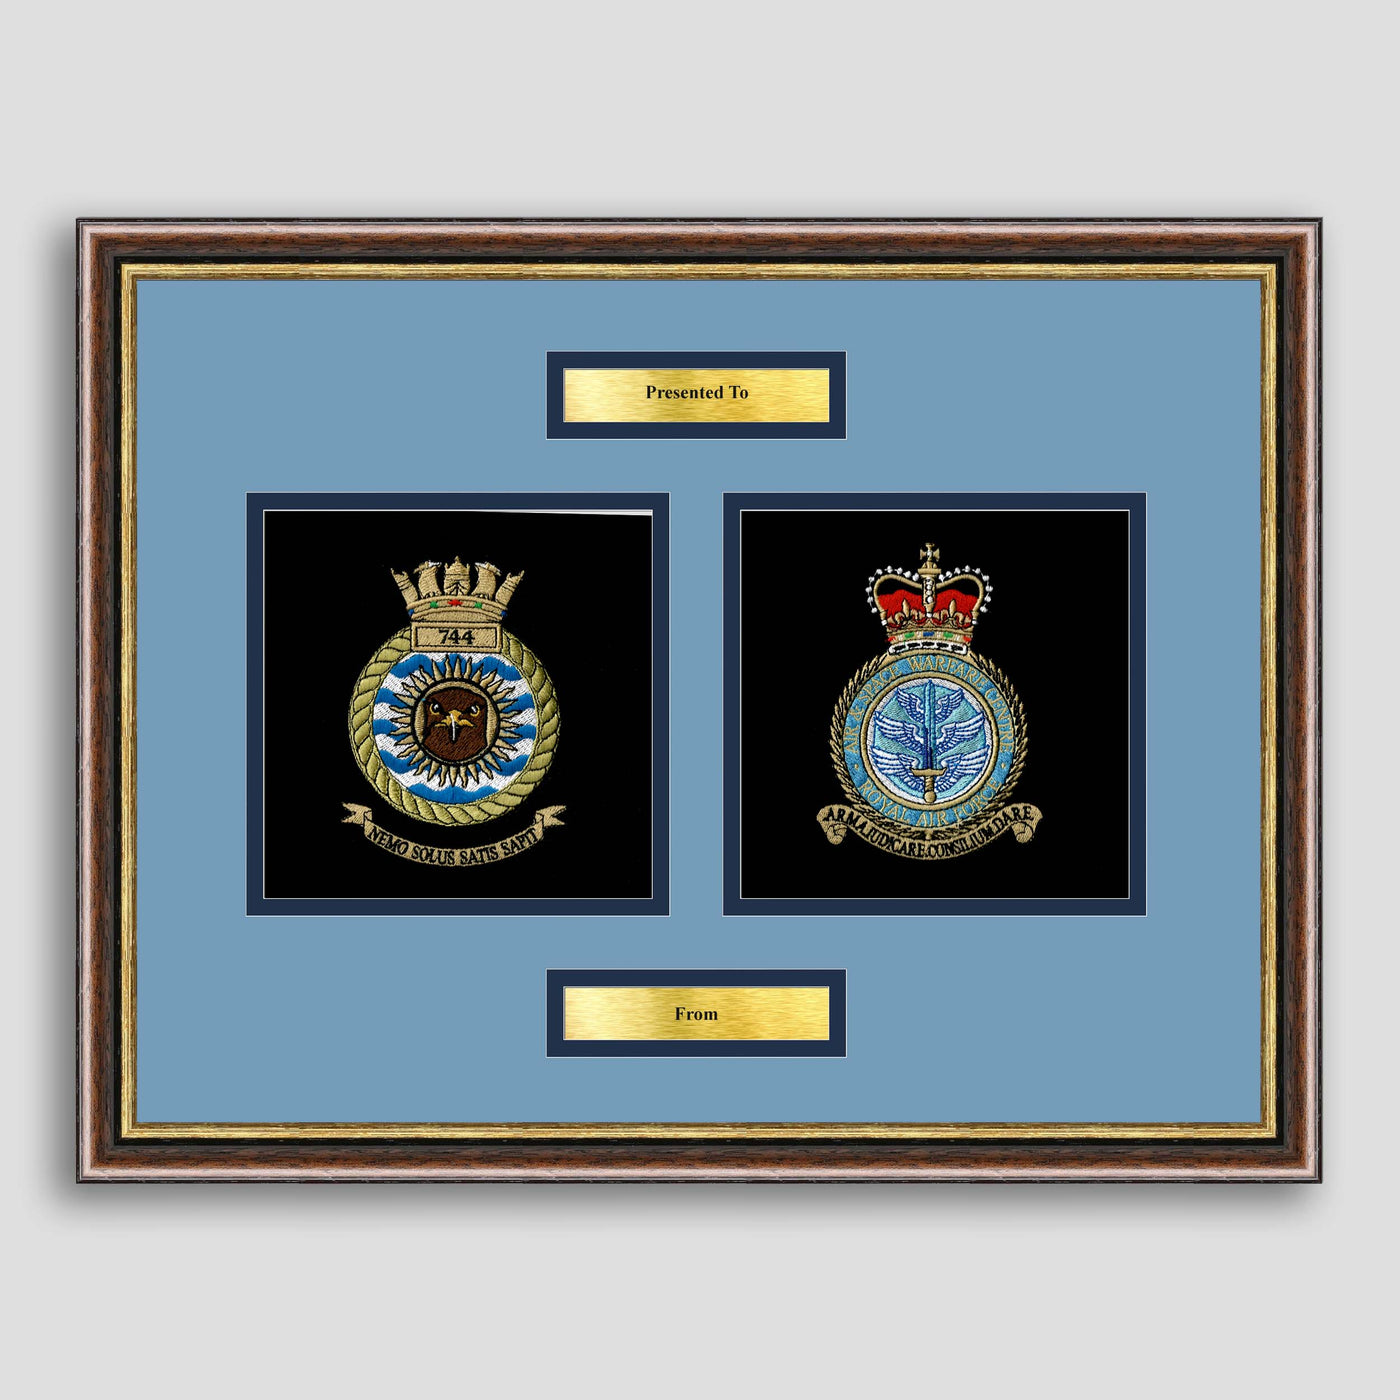 744 Naval Air Squadron & Air and Space Warfare Centre Framed Military Embroidery Presentation